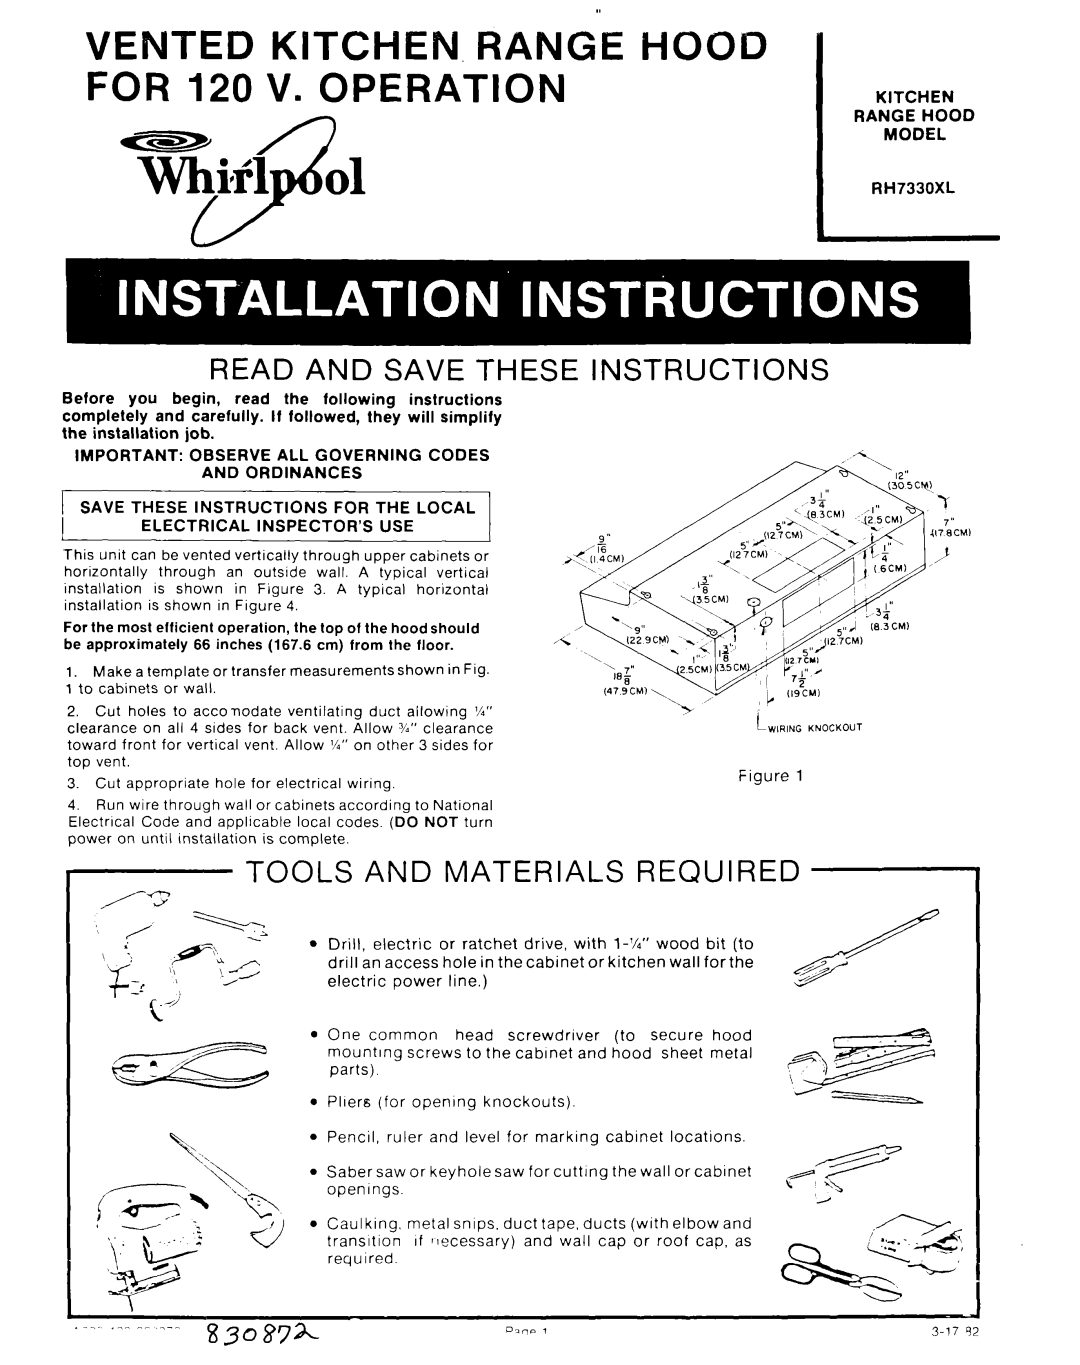 Whirlpool manual Important Observe All Governing Codes And Ordinances, KITCHEN RANGE HOOD MODEL RH7330XL, YKifl 01 4a 